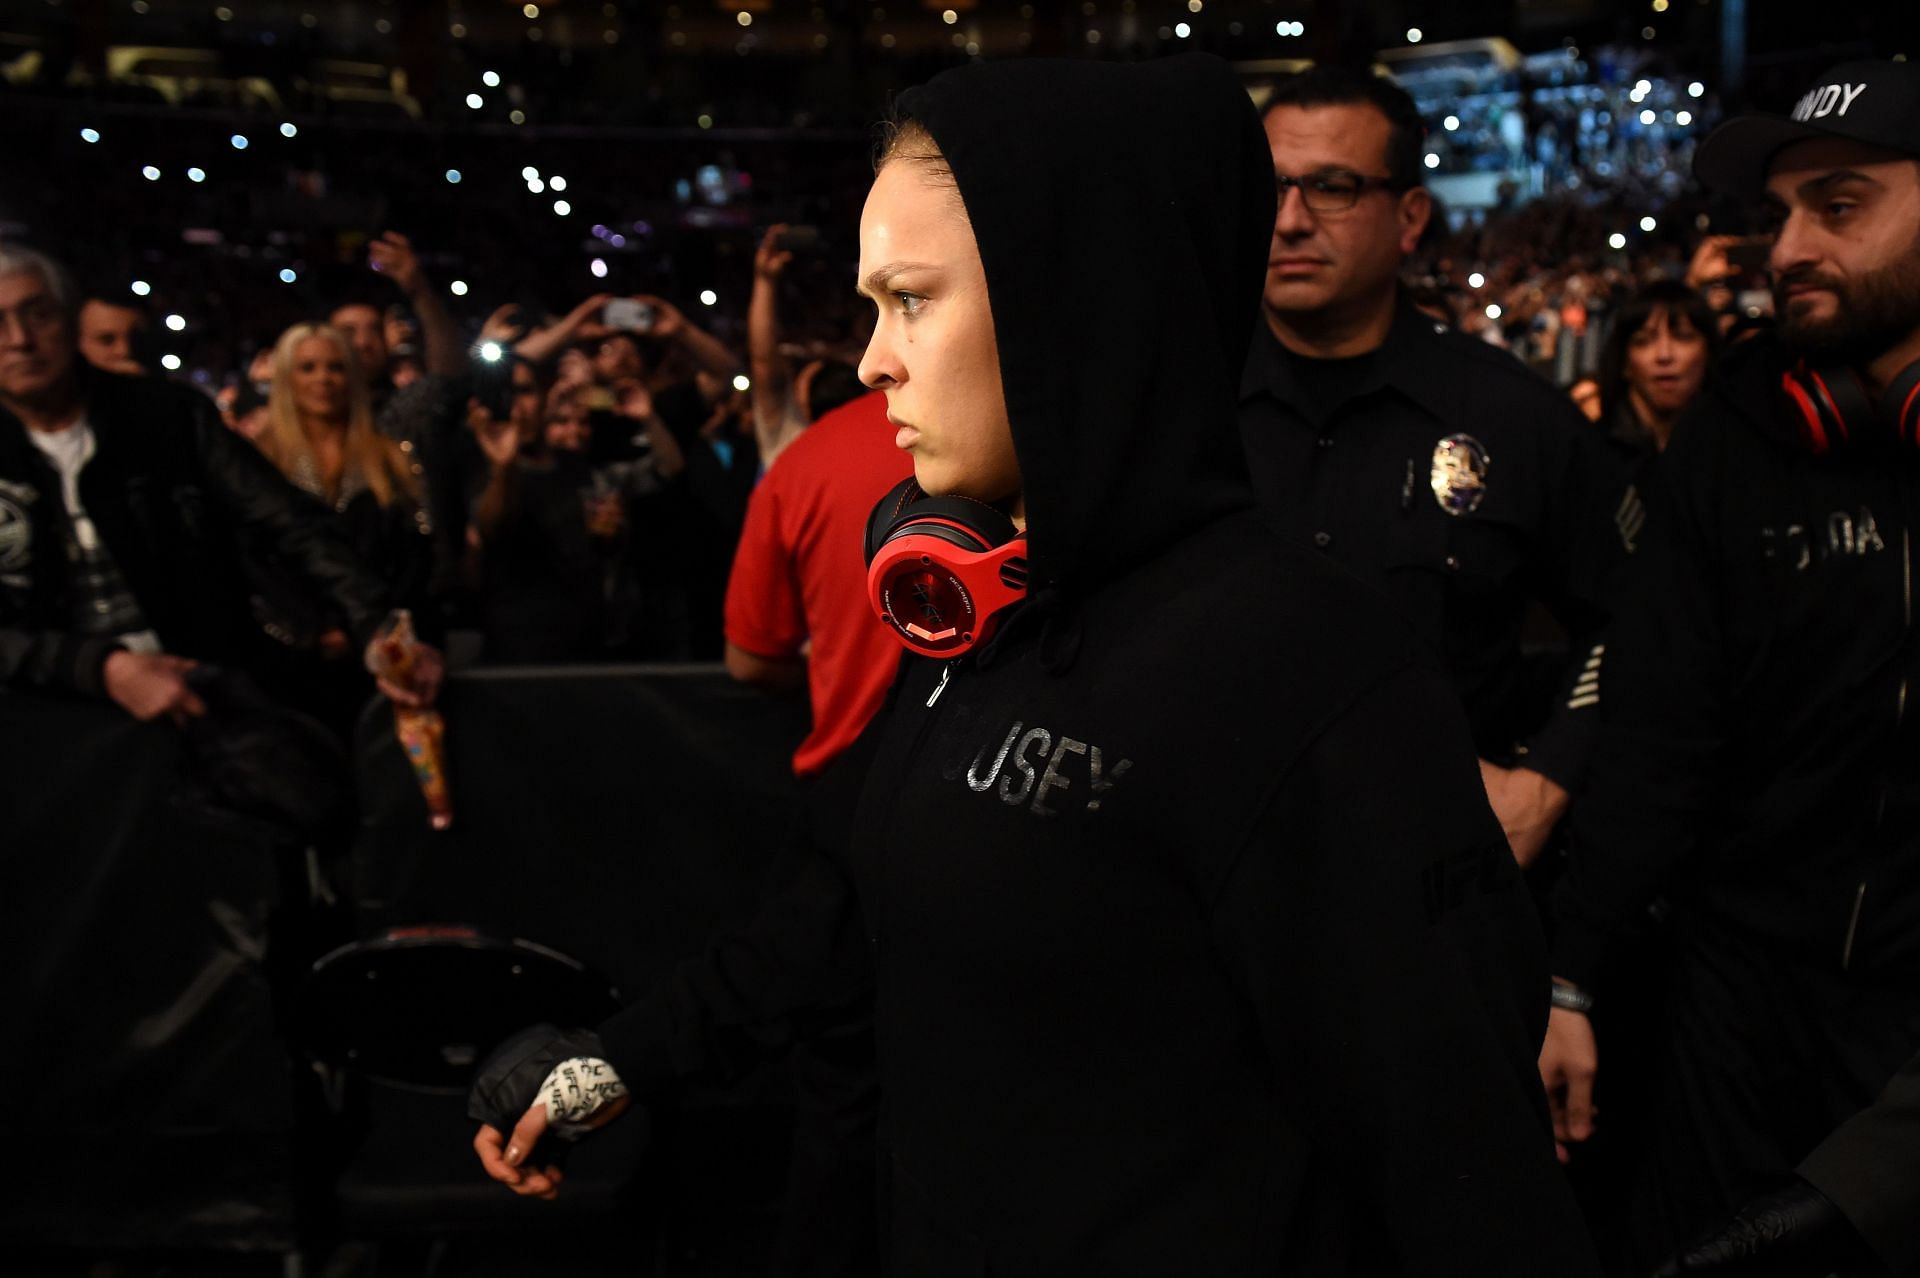 Ronda Rousey has an MMA record of 12-2